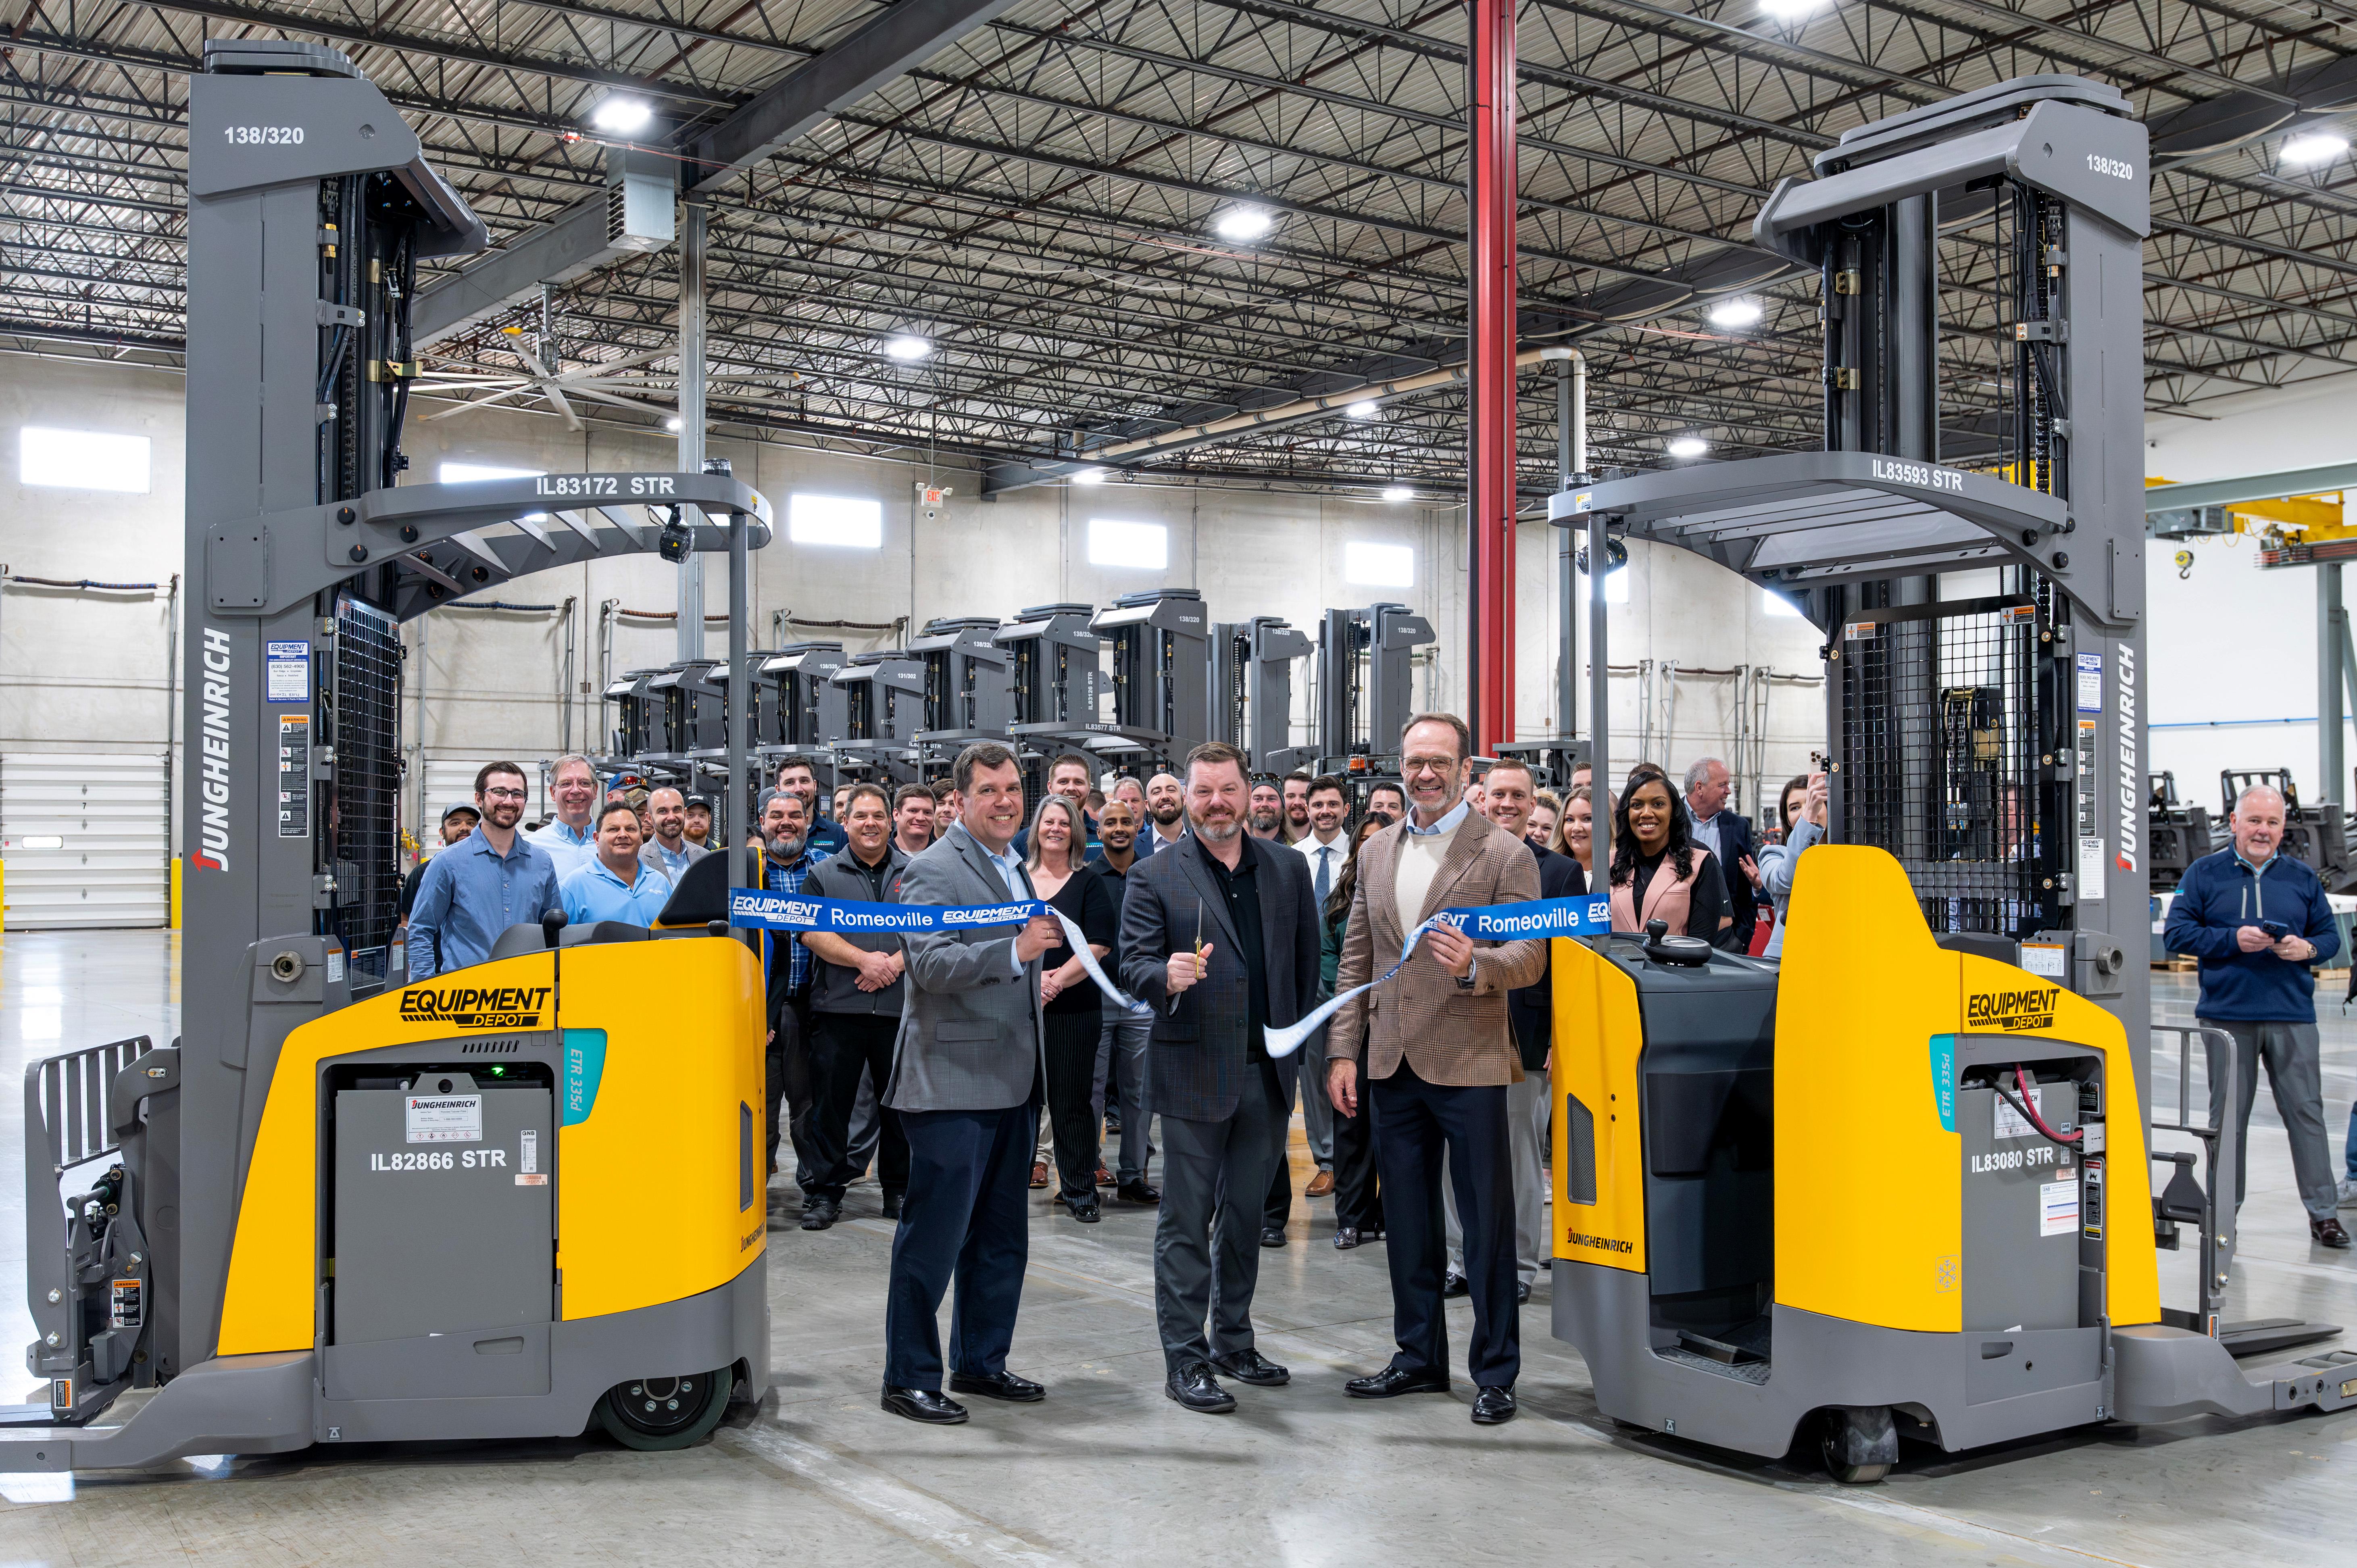 Equipment Depot America’s largest independently operated material handling and equipment rental source, celebrates the grand opening of its 75,000 square foot facility in Romeoville, IL.